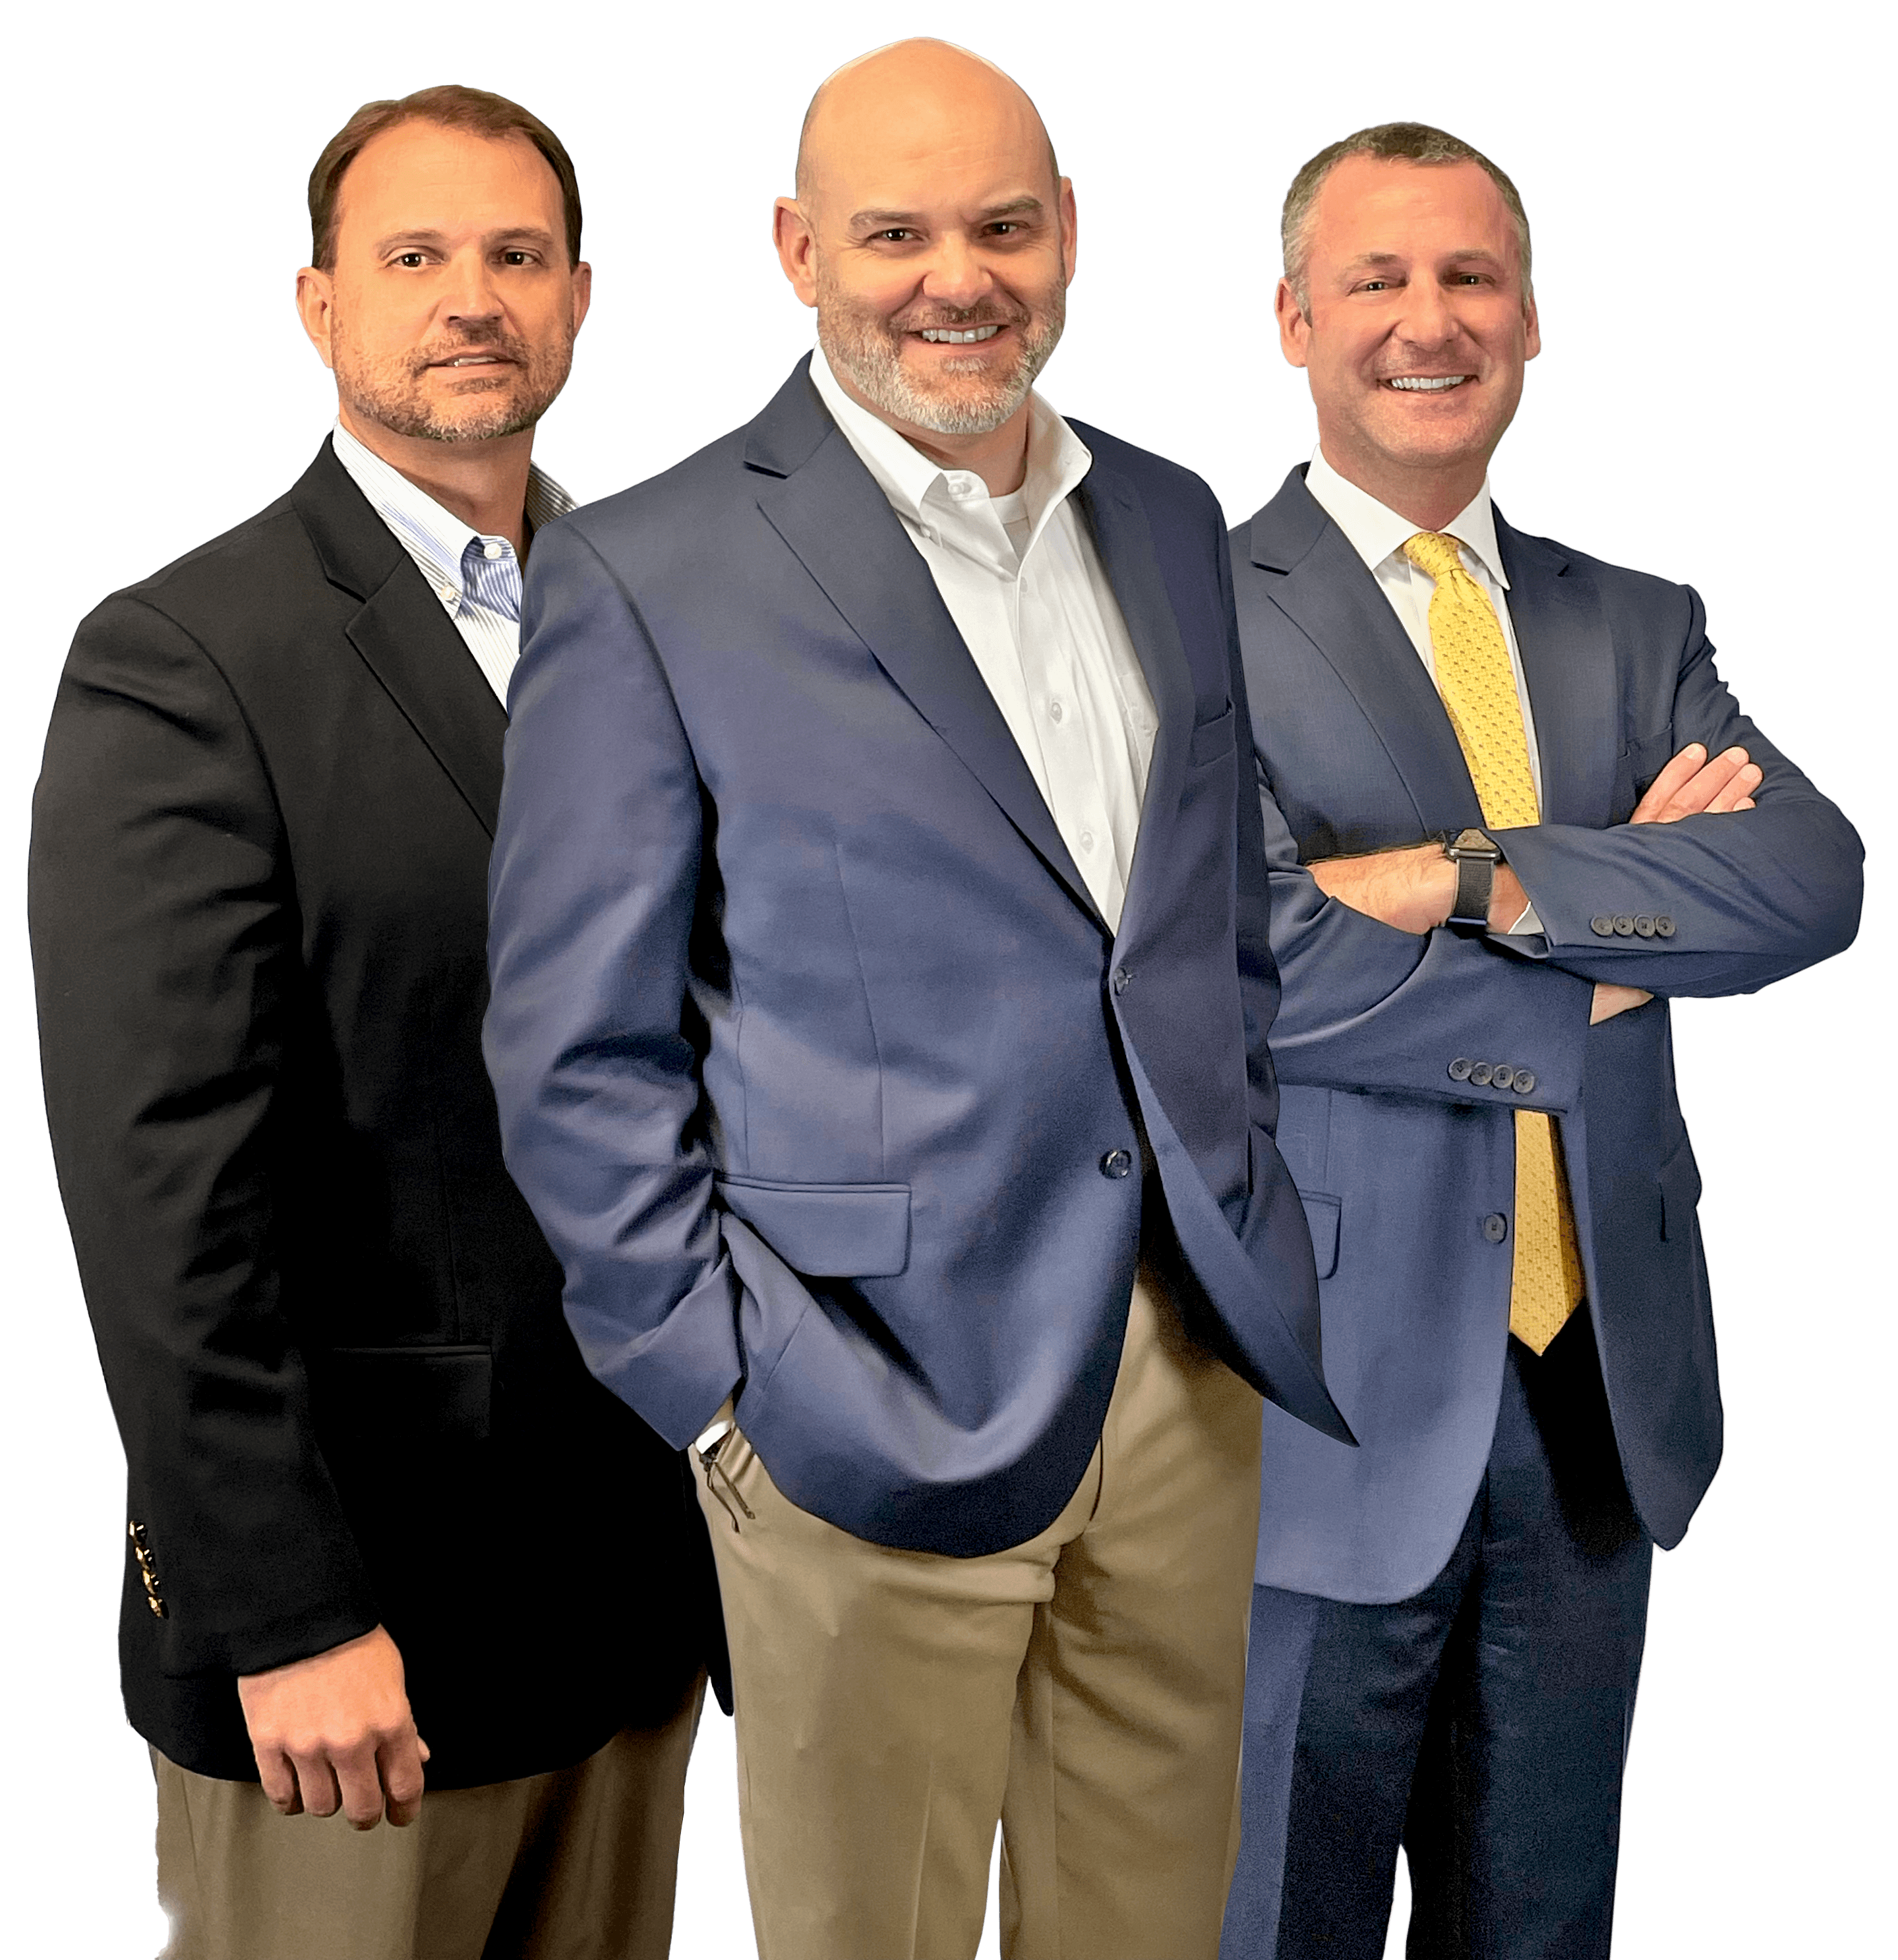 TCB Lending Team Members - Jamey Durrence, Philip Williams, and Chris Barr